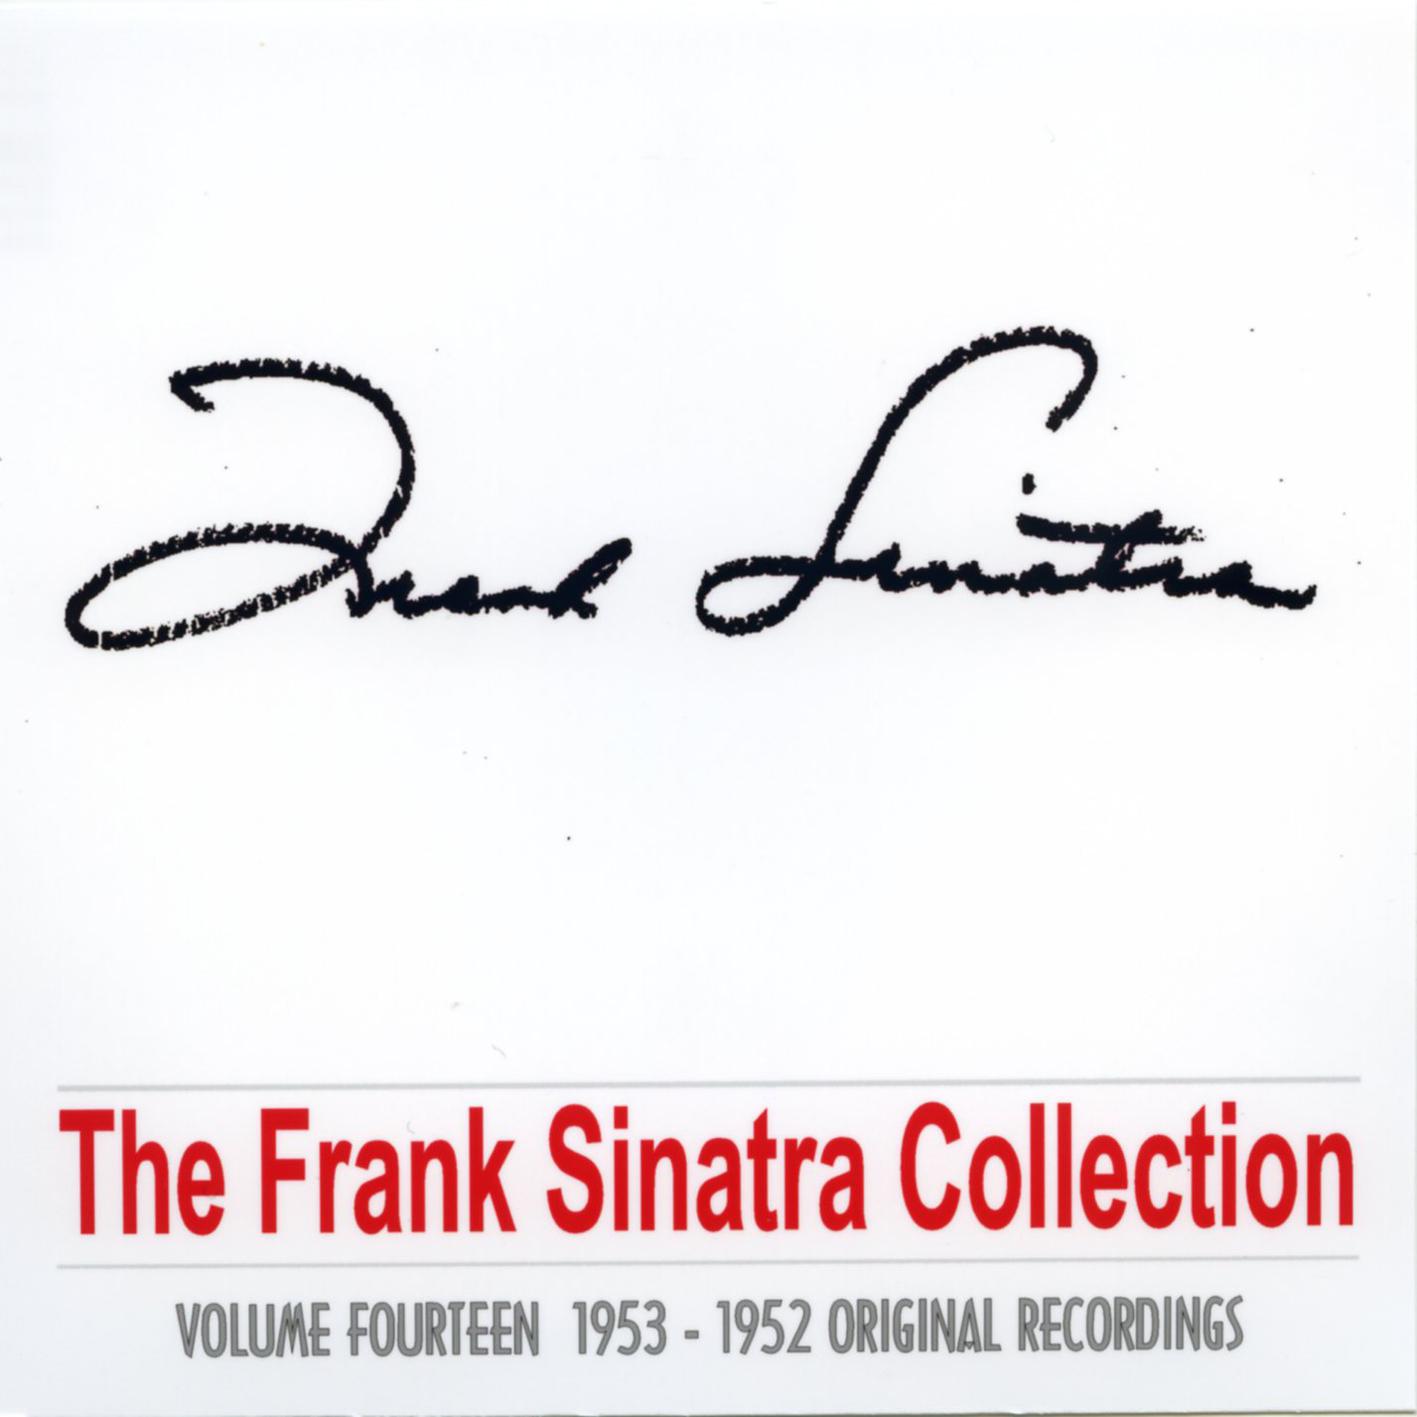 The Frank Sinatra Collection - Vol. Fourteen